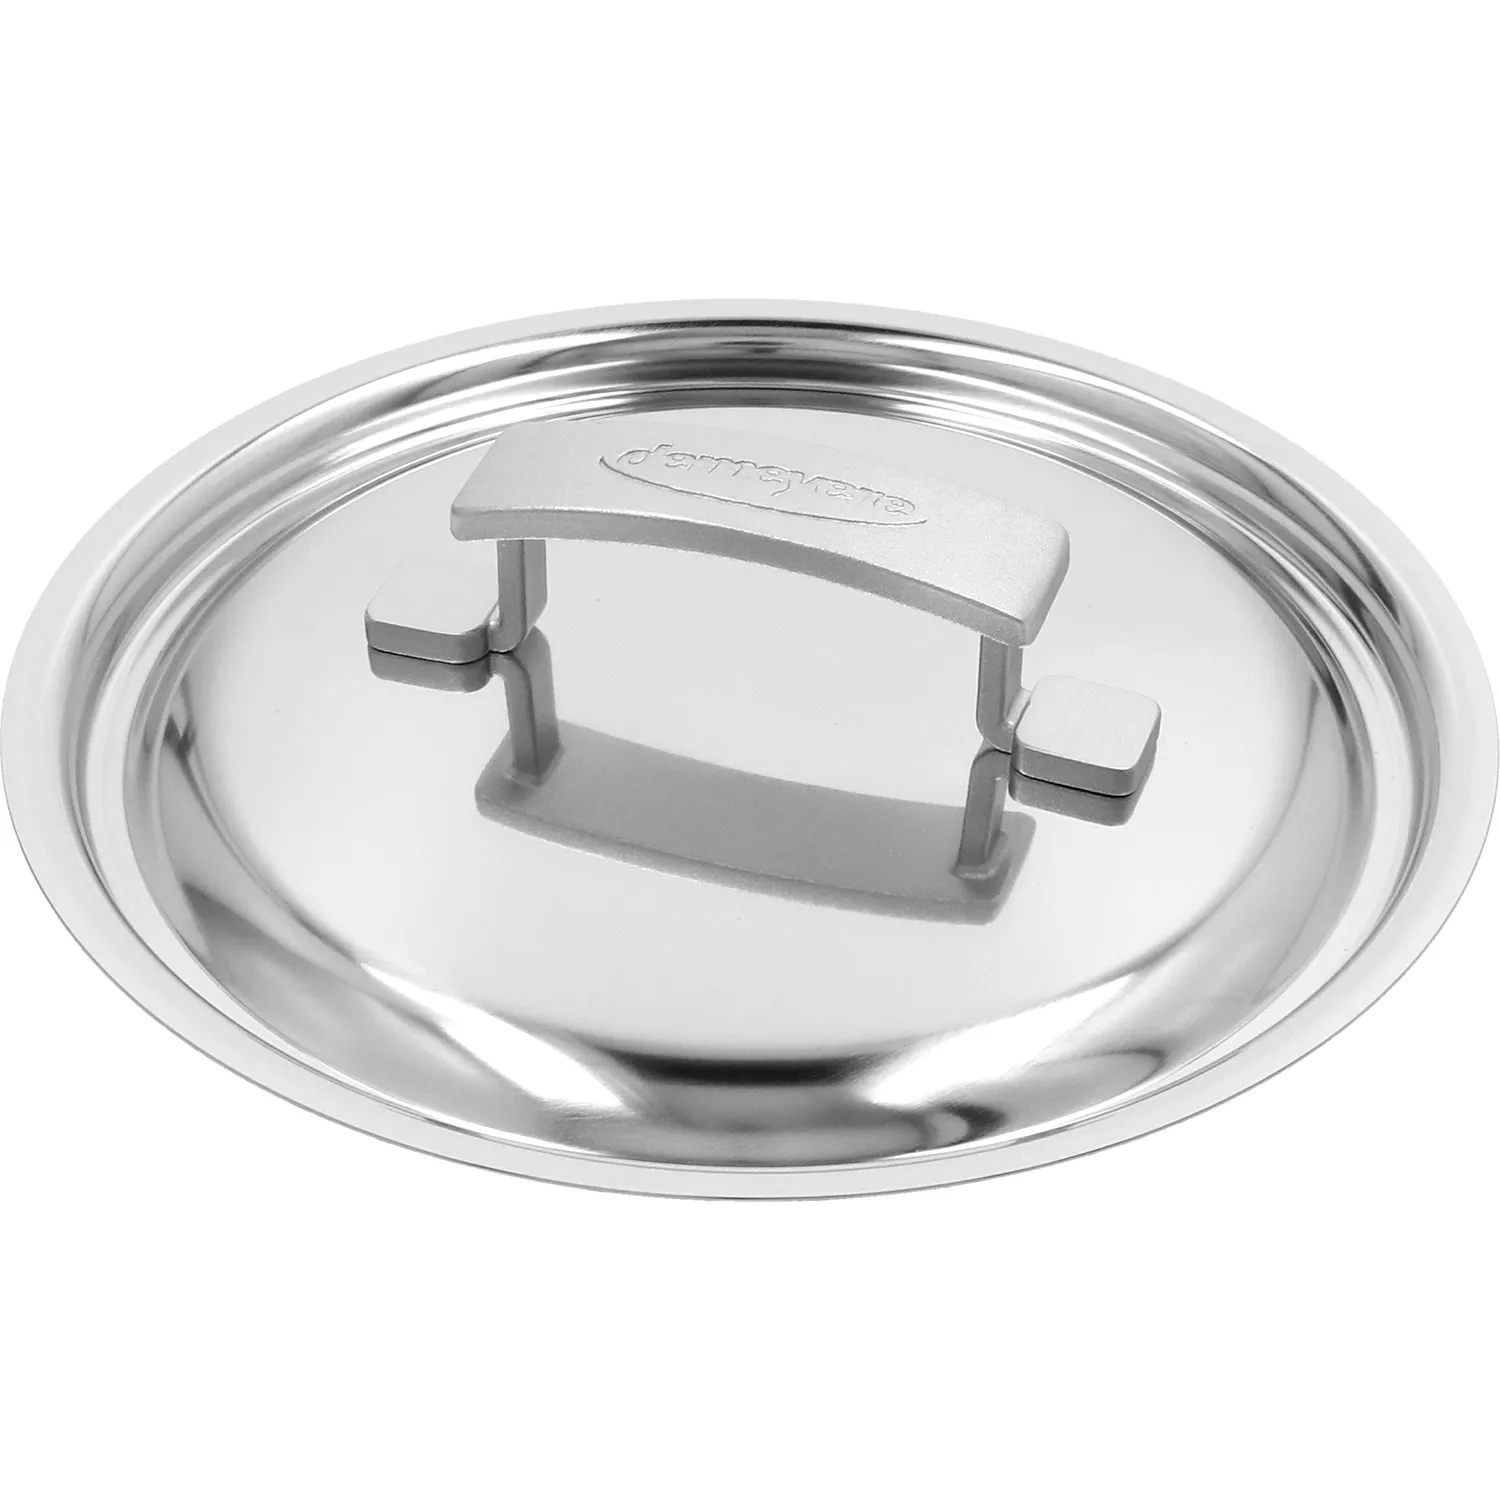 Demeyere Industry5 Stainless Steel Saucier With Lid, 2 Qt.